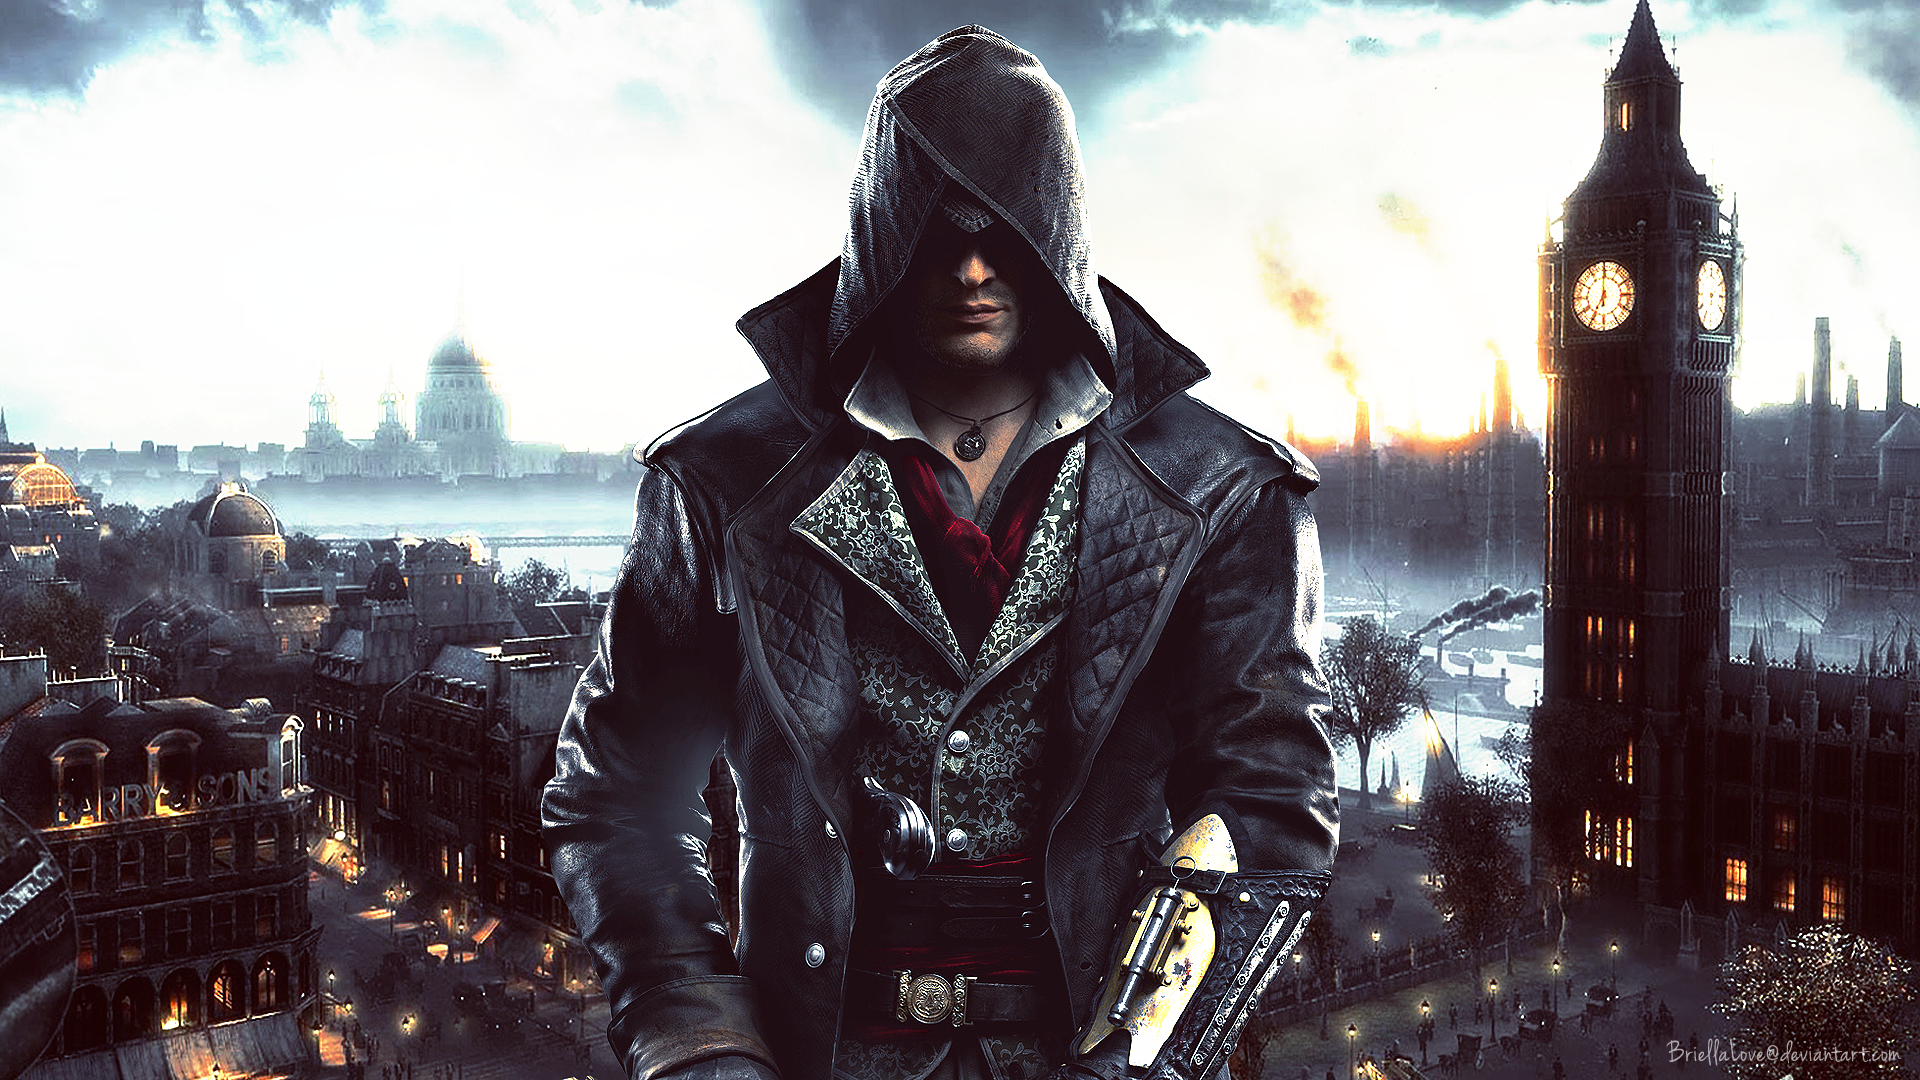 Image for Assassin's Creed Syndicate PS4 Pro Analysis